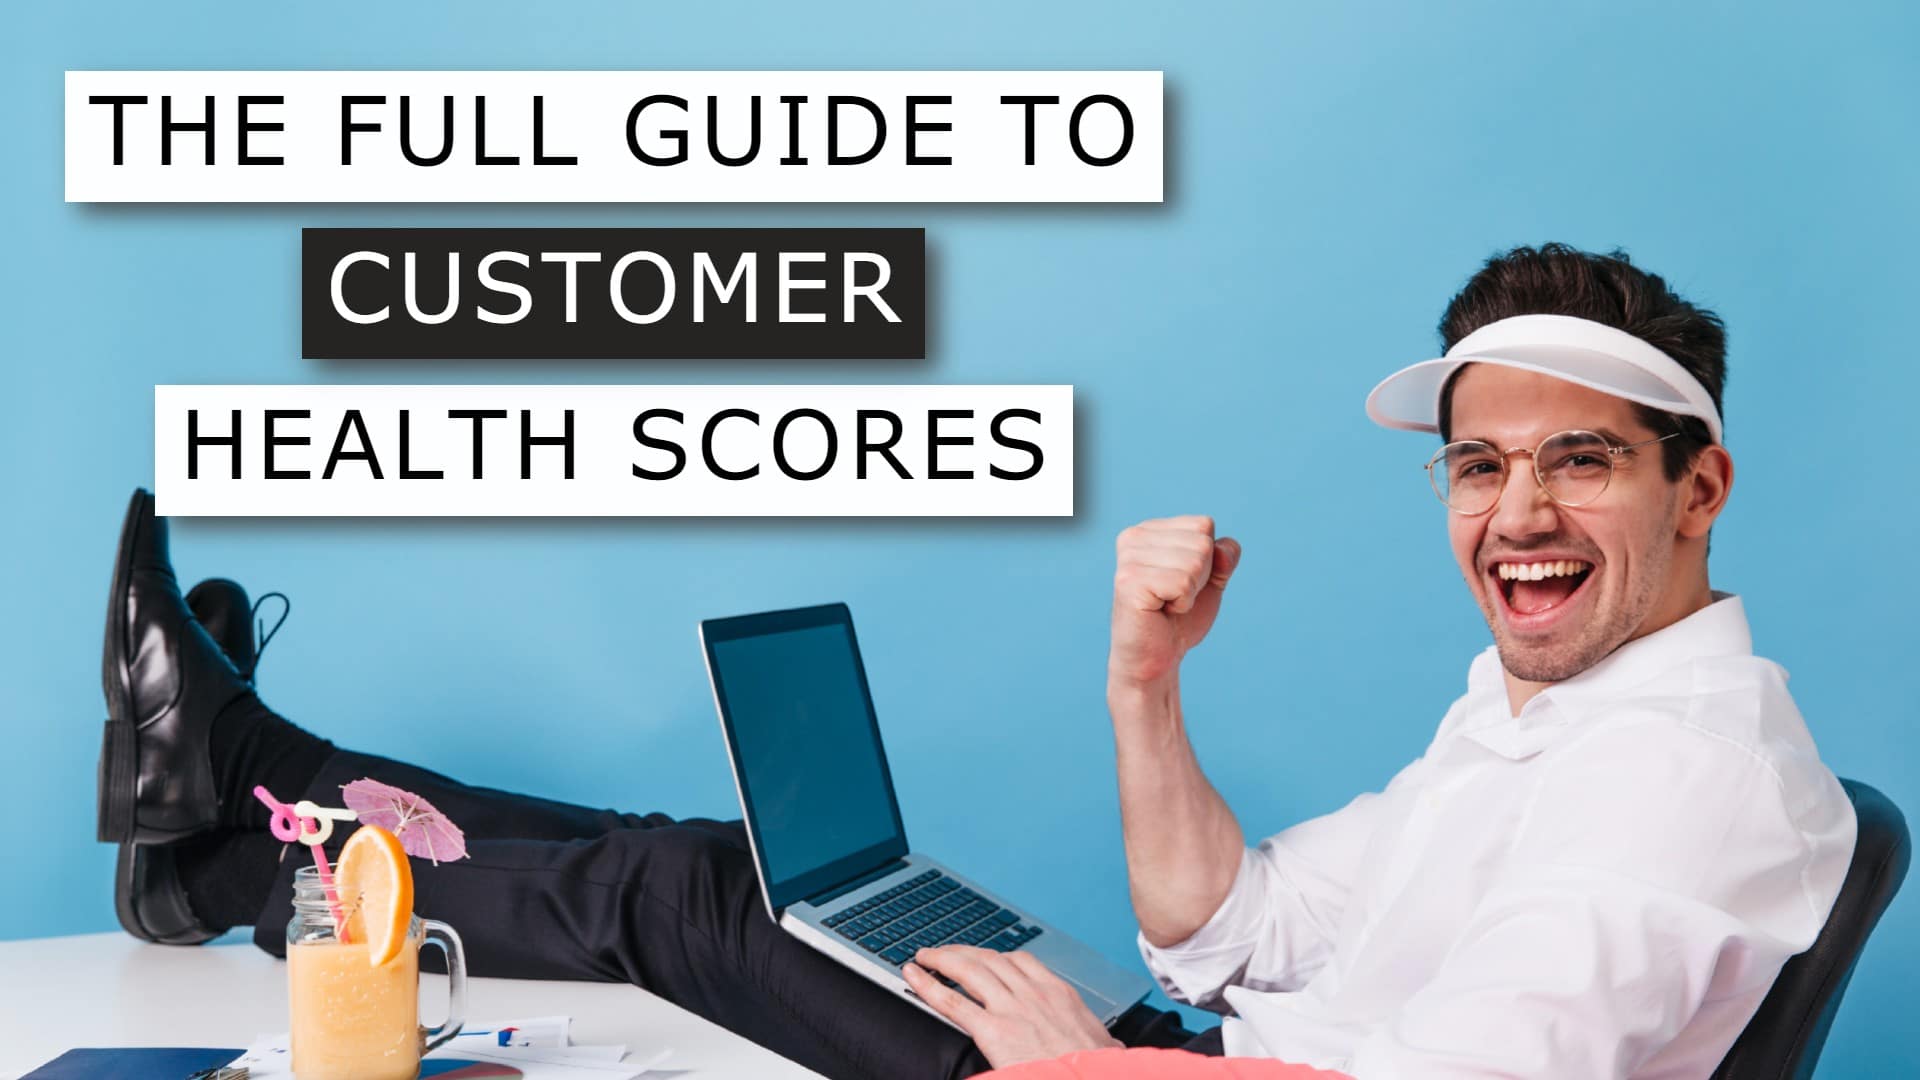 The Full Guide to Customer Health Scores